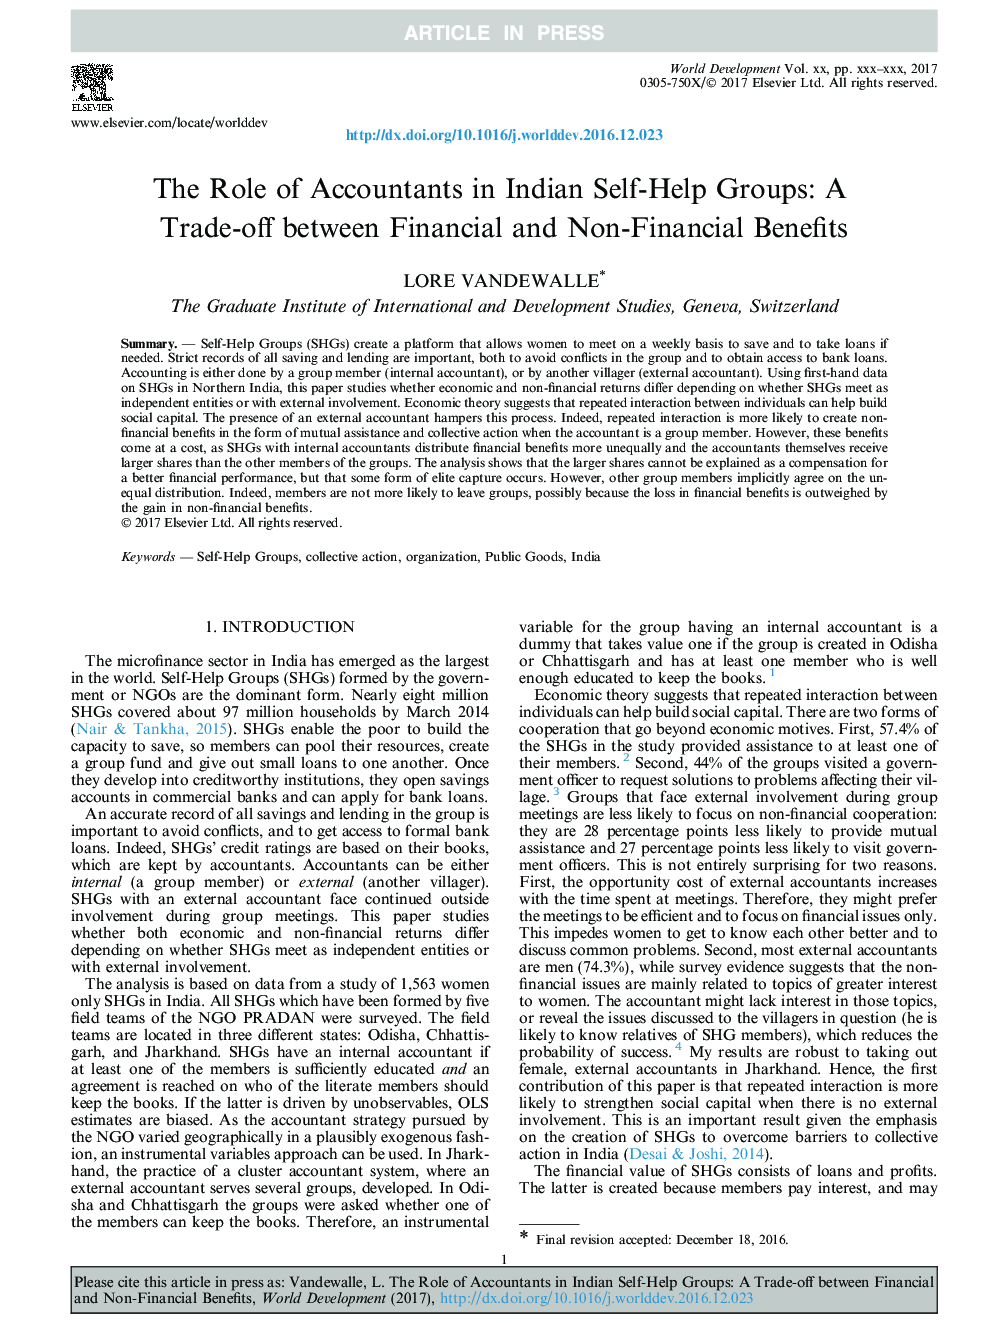 The Role of Accountants in Indian Self-Help Groups: A Trade-off between Financial and Non-Financial Benefits